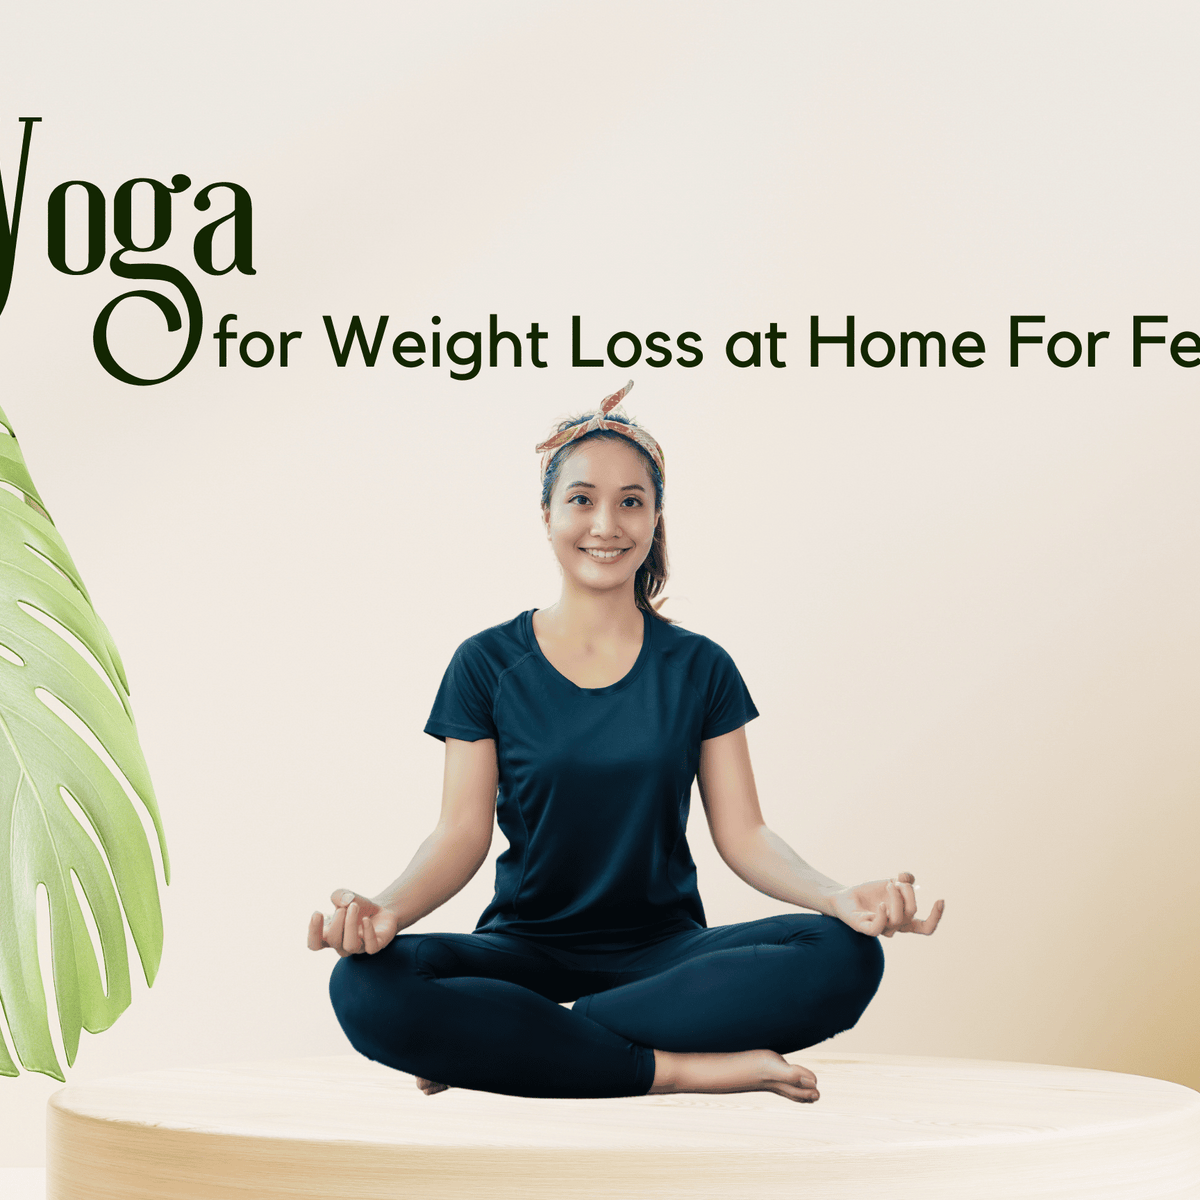 Can You Lose Weight Doing Yoga? Types, Exercises, and More